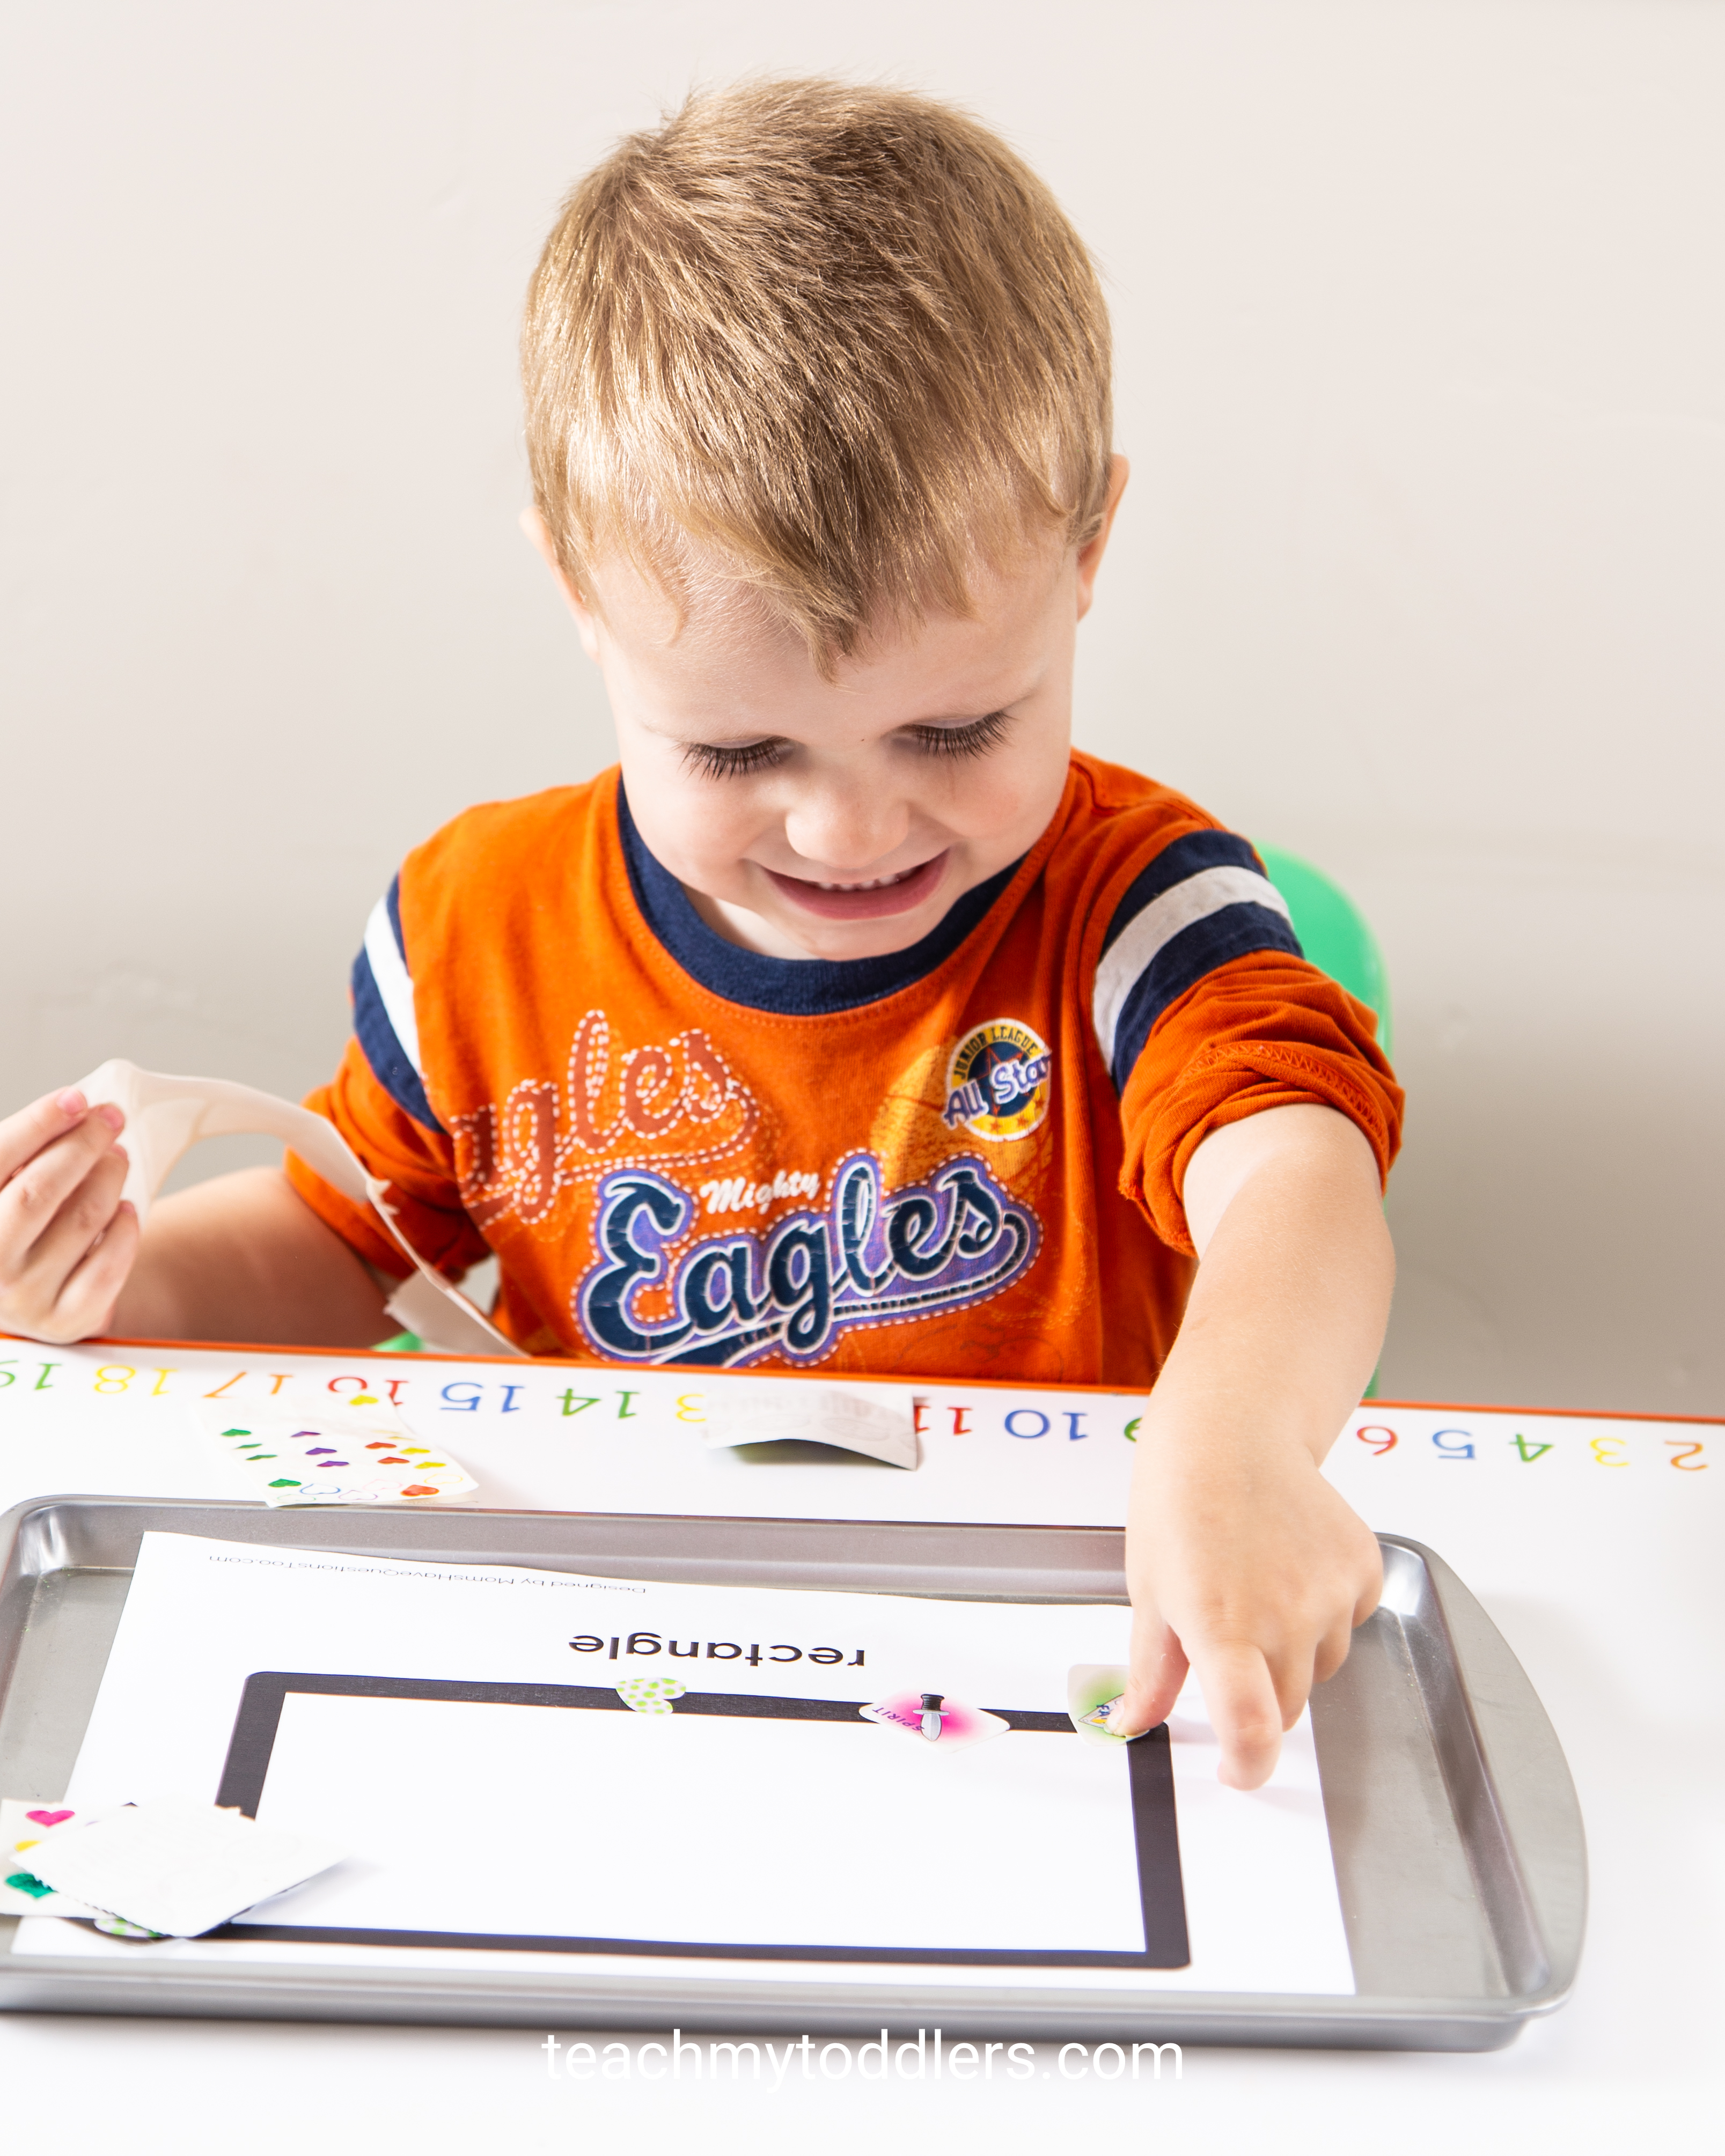 Learn how to use these rectangle trays to teach your toddlers shapes